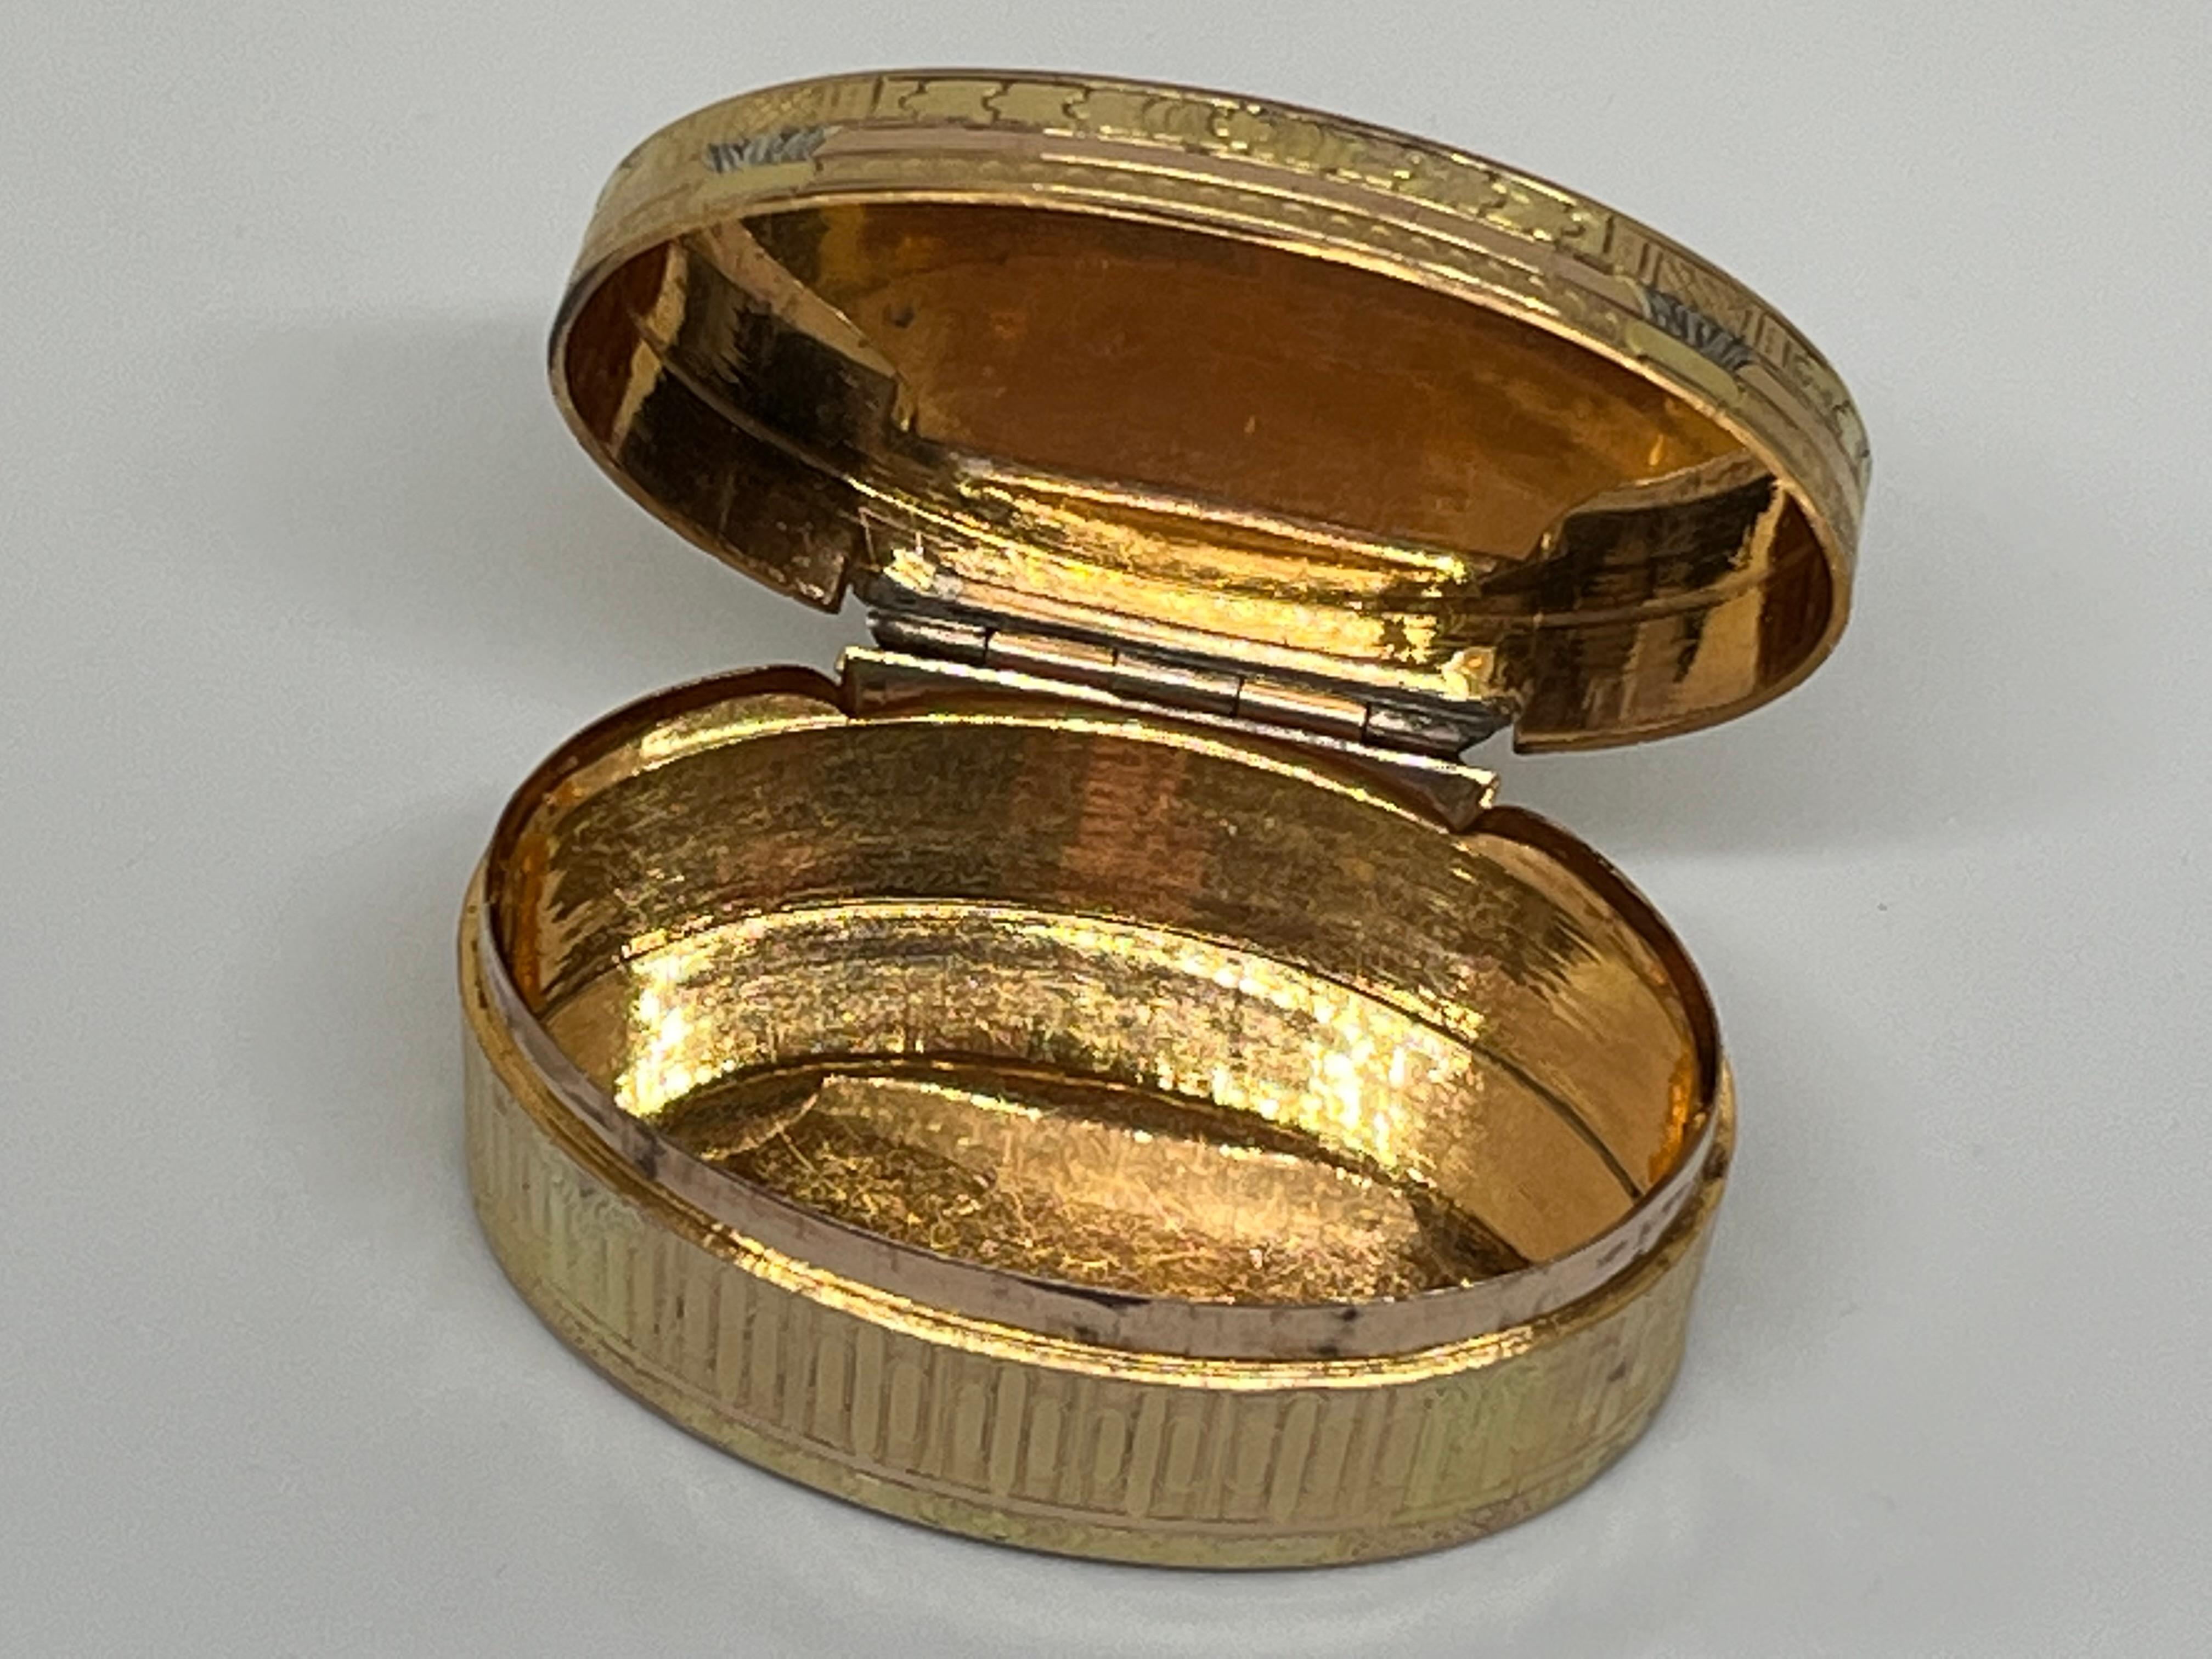 18th Century and Earlier French Eighteenth-Century Silver-Gilt Snuff Box, of Outstanding Quality